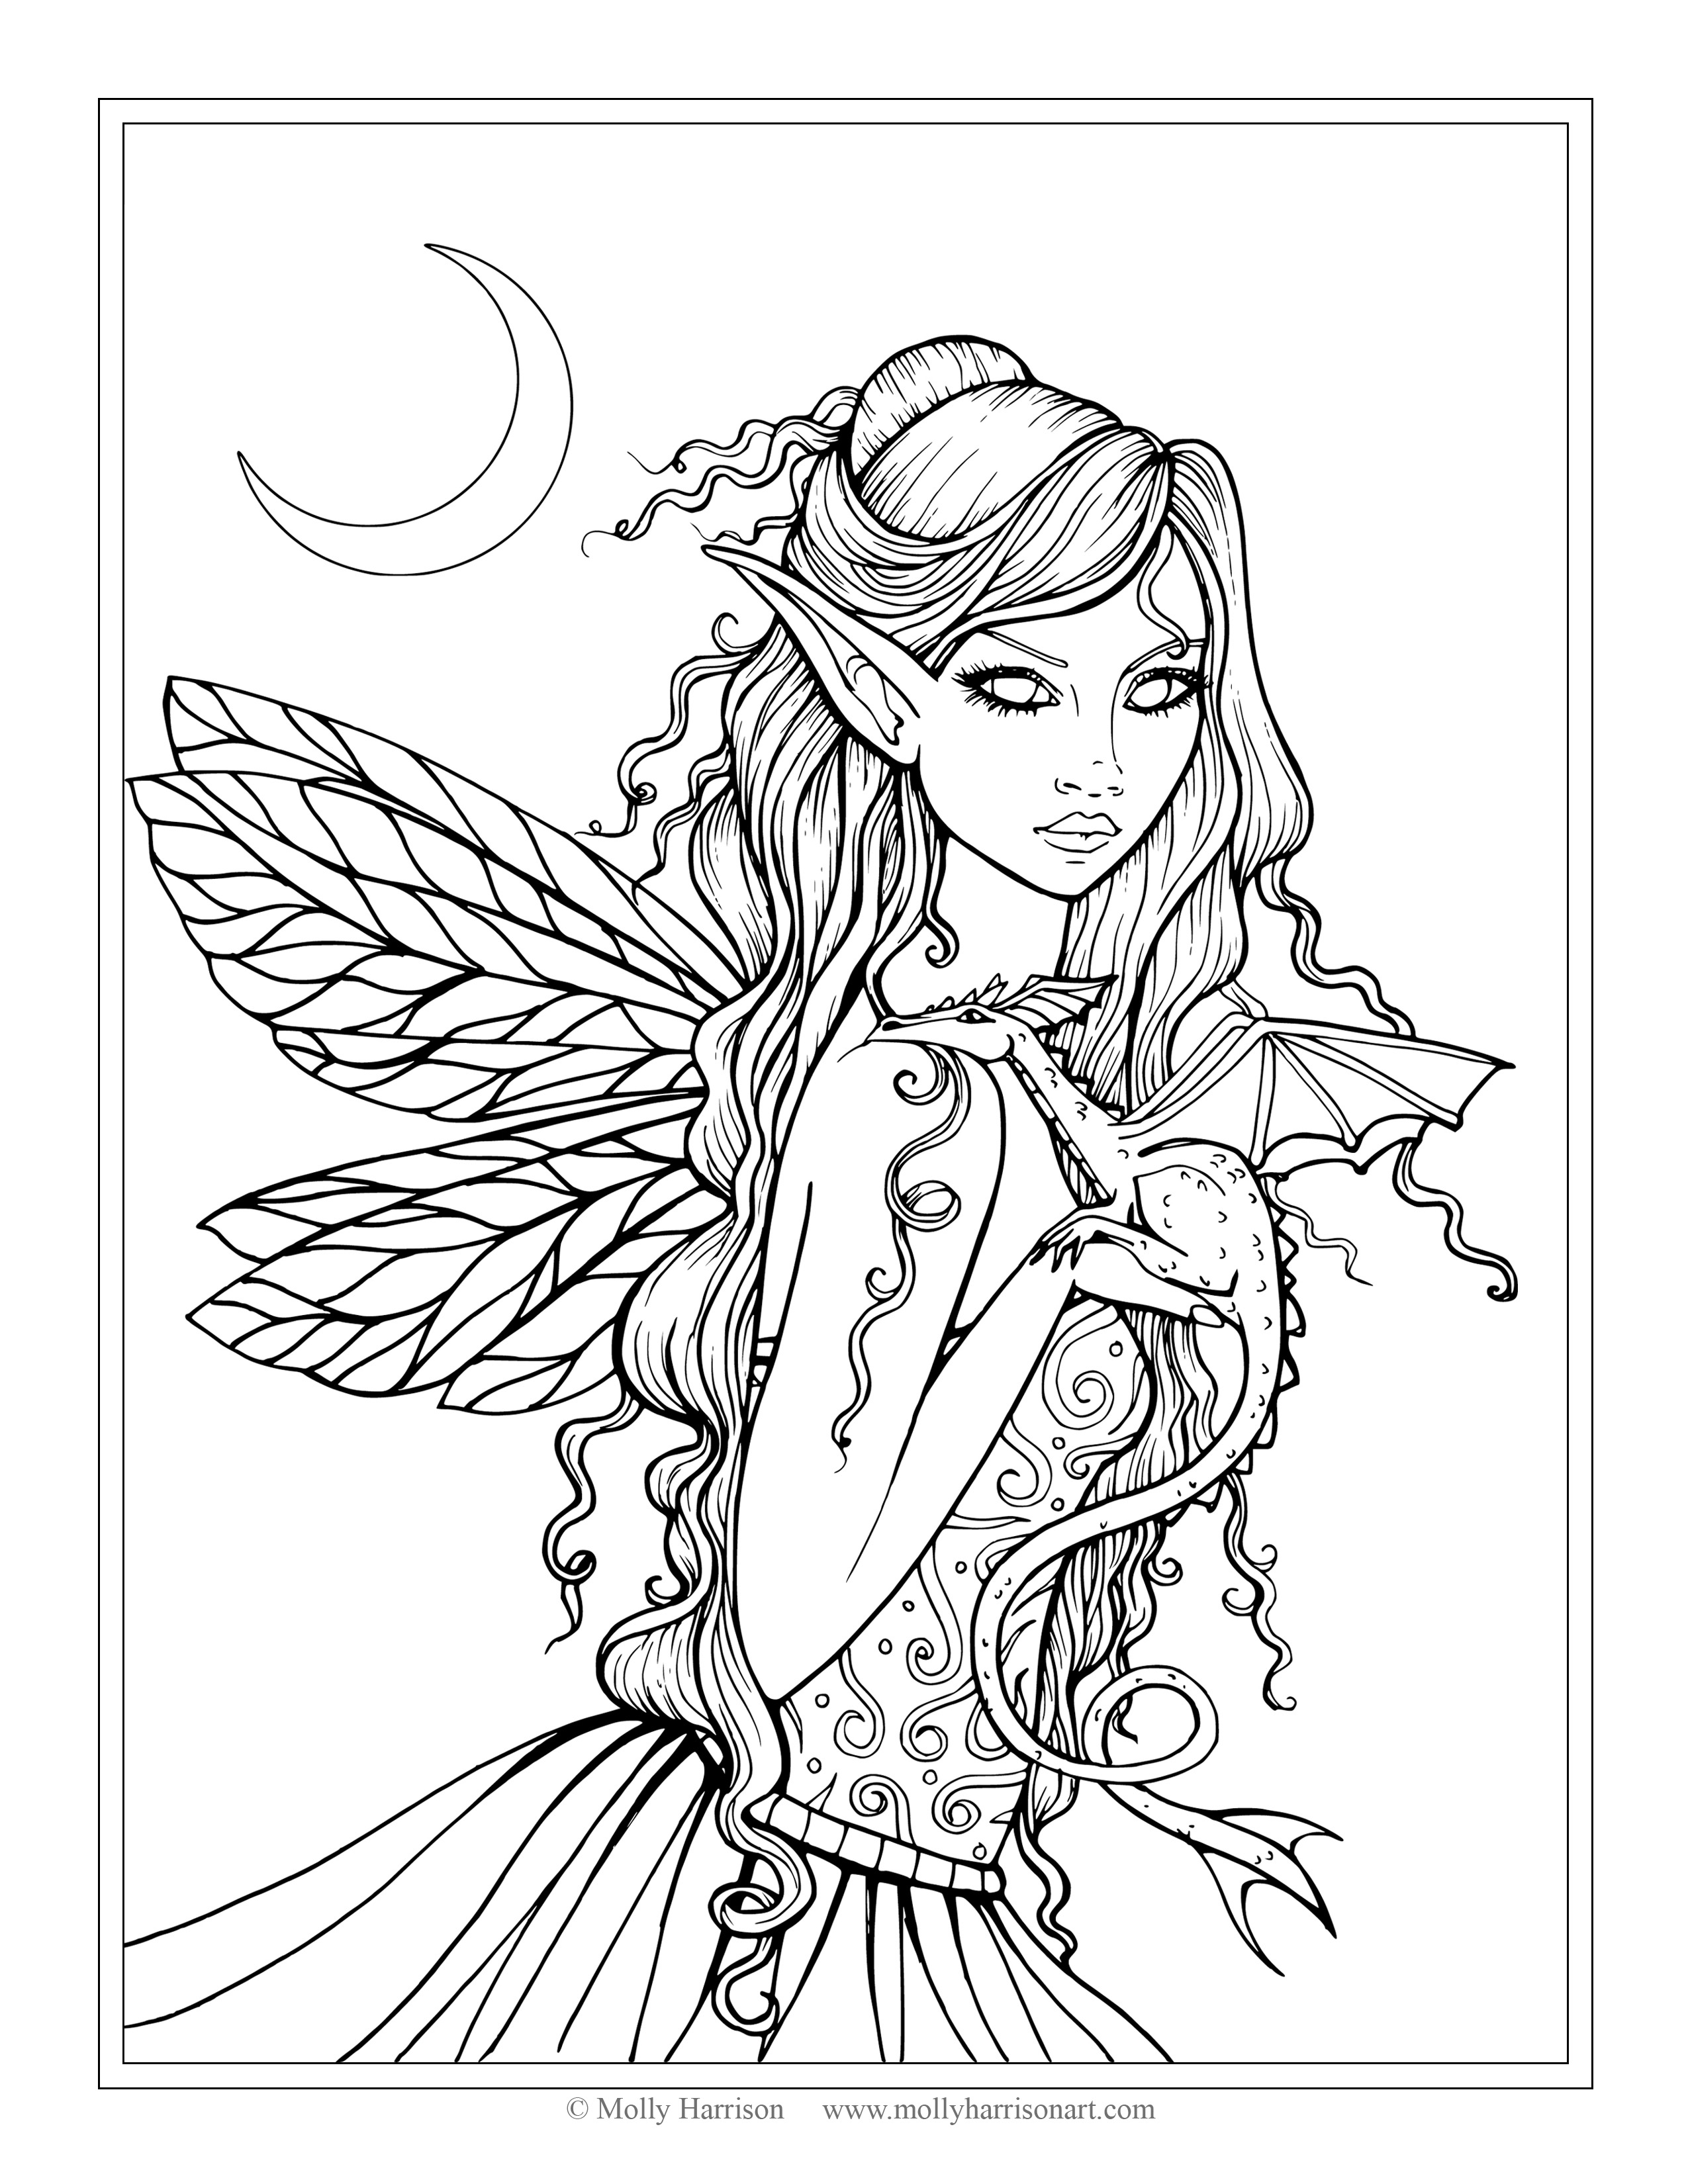 Hipster Girl Coloring Pages at GetColorings.com | Free printable